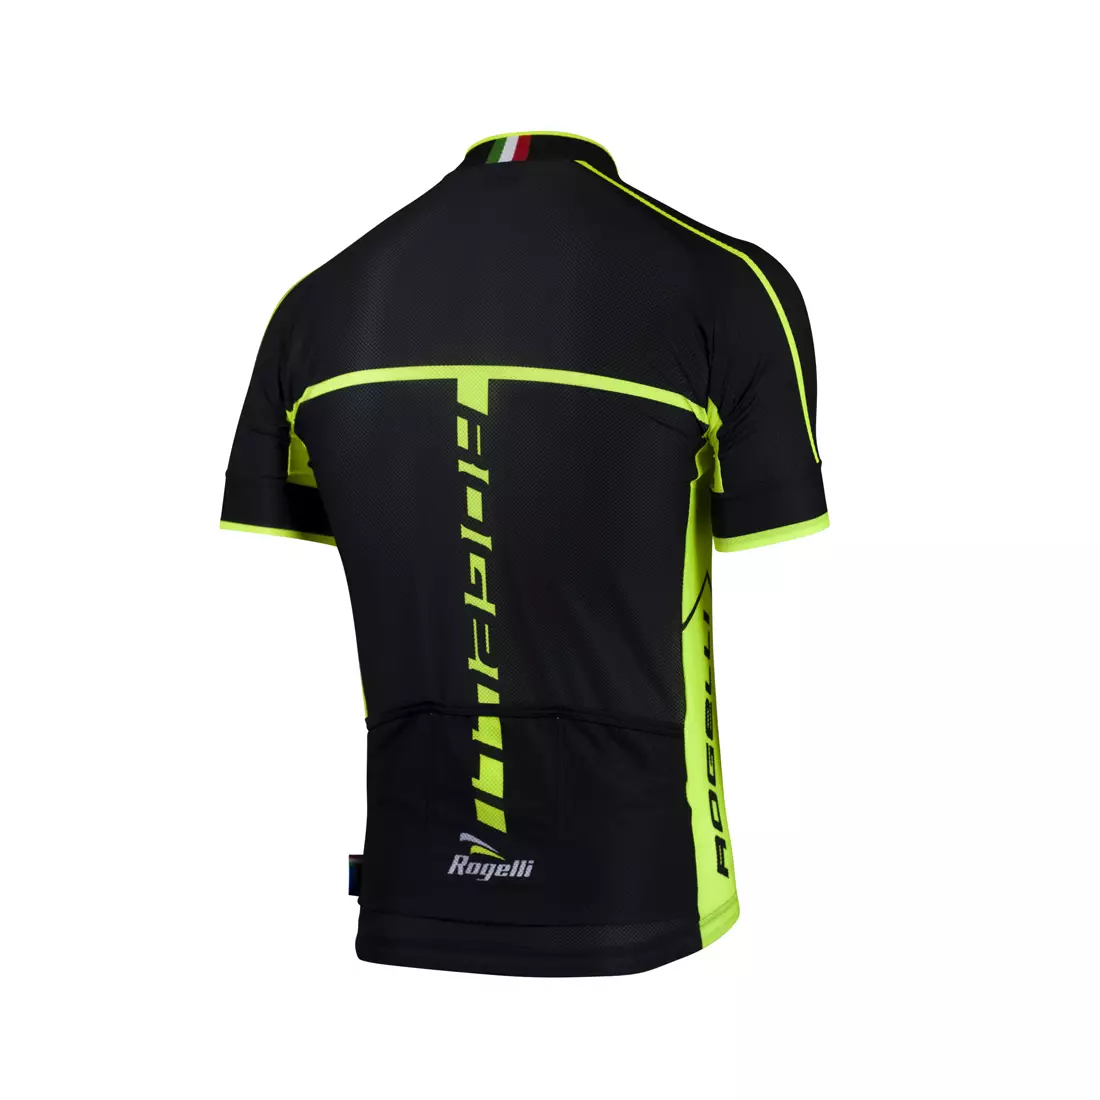 ROGELLI UMBRIA 2.0 men's cycling jersey, black and fluorine